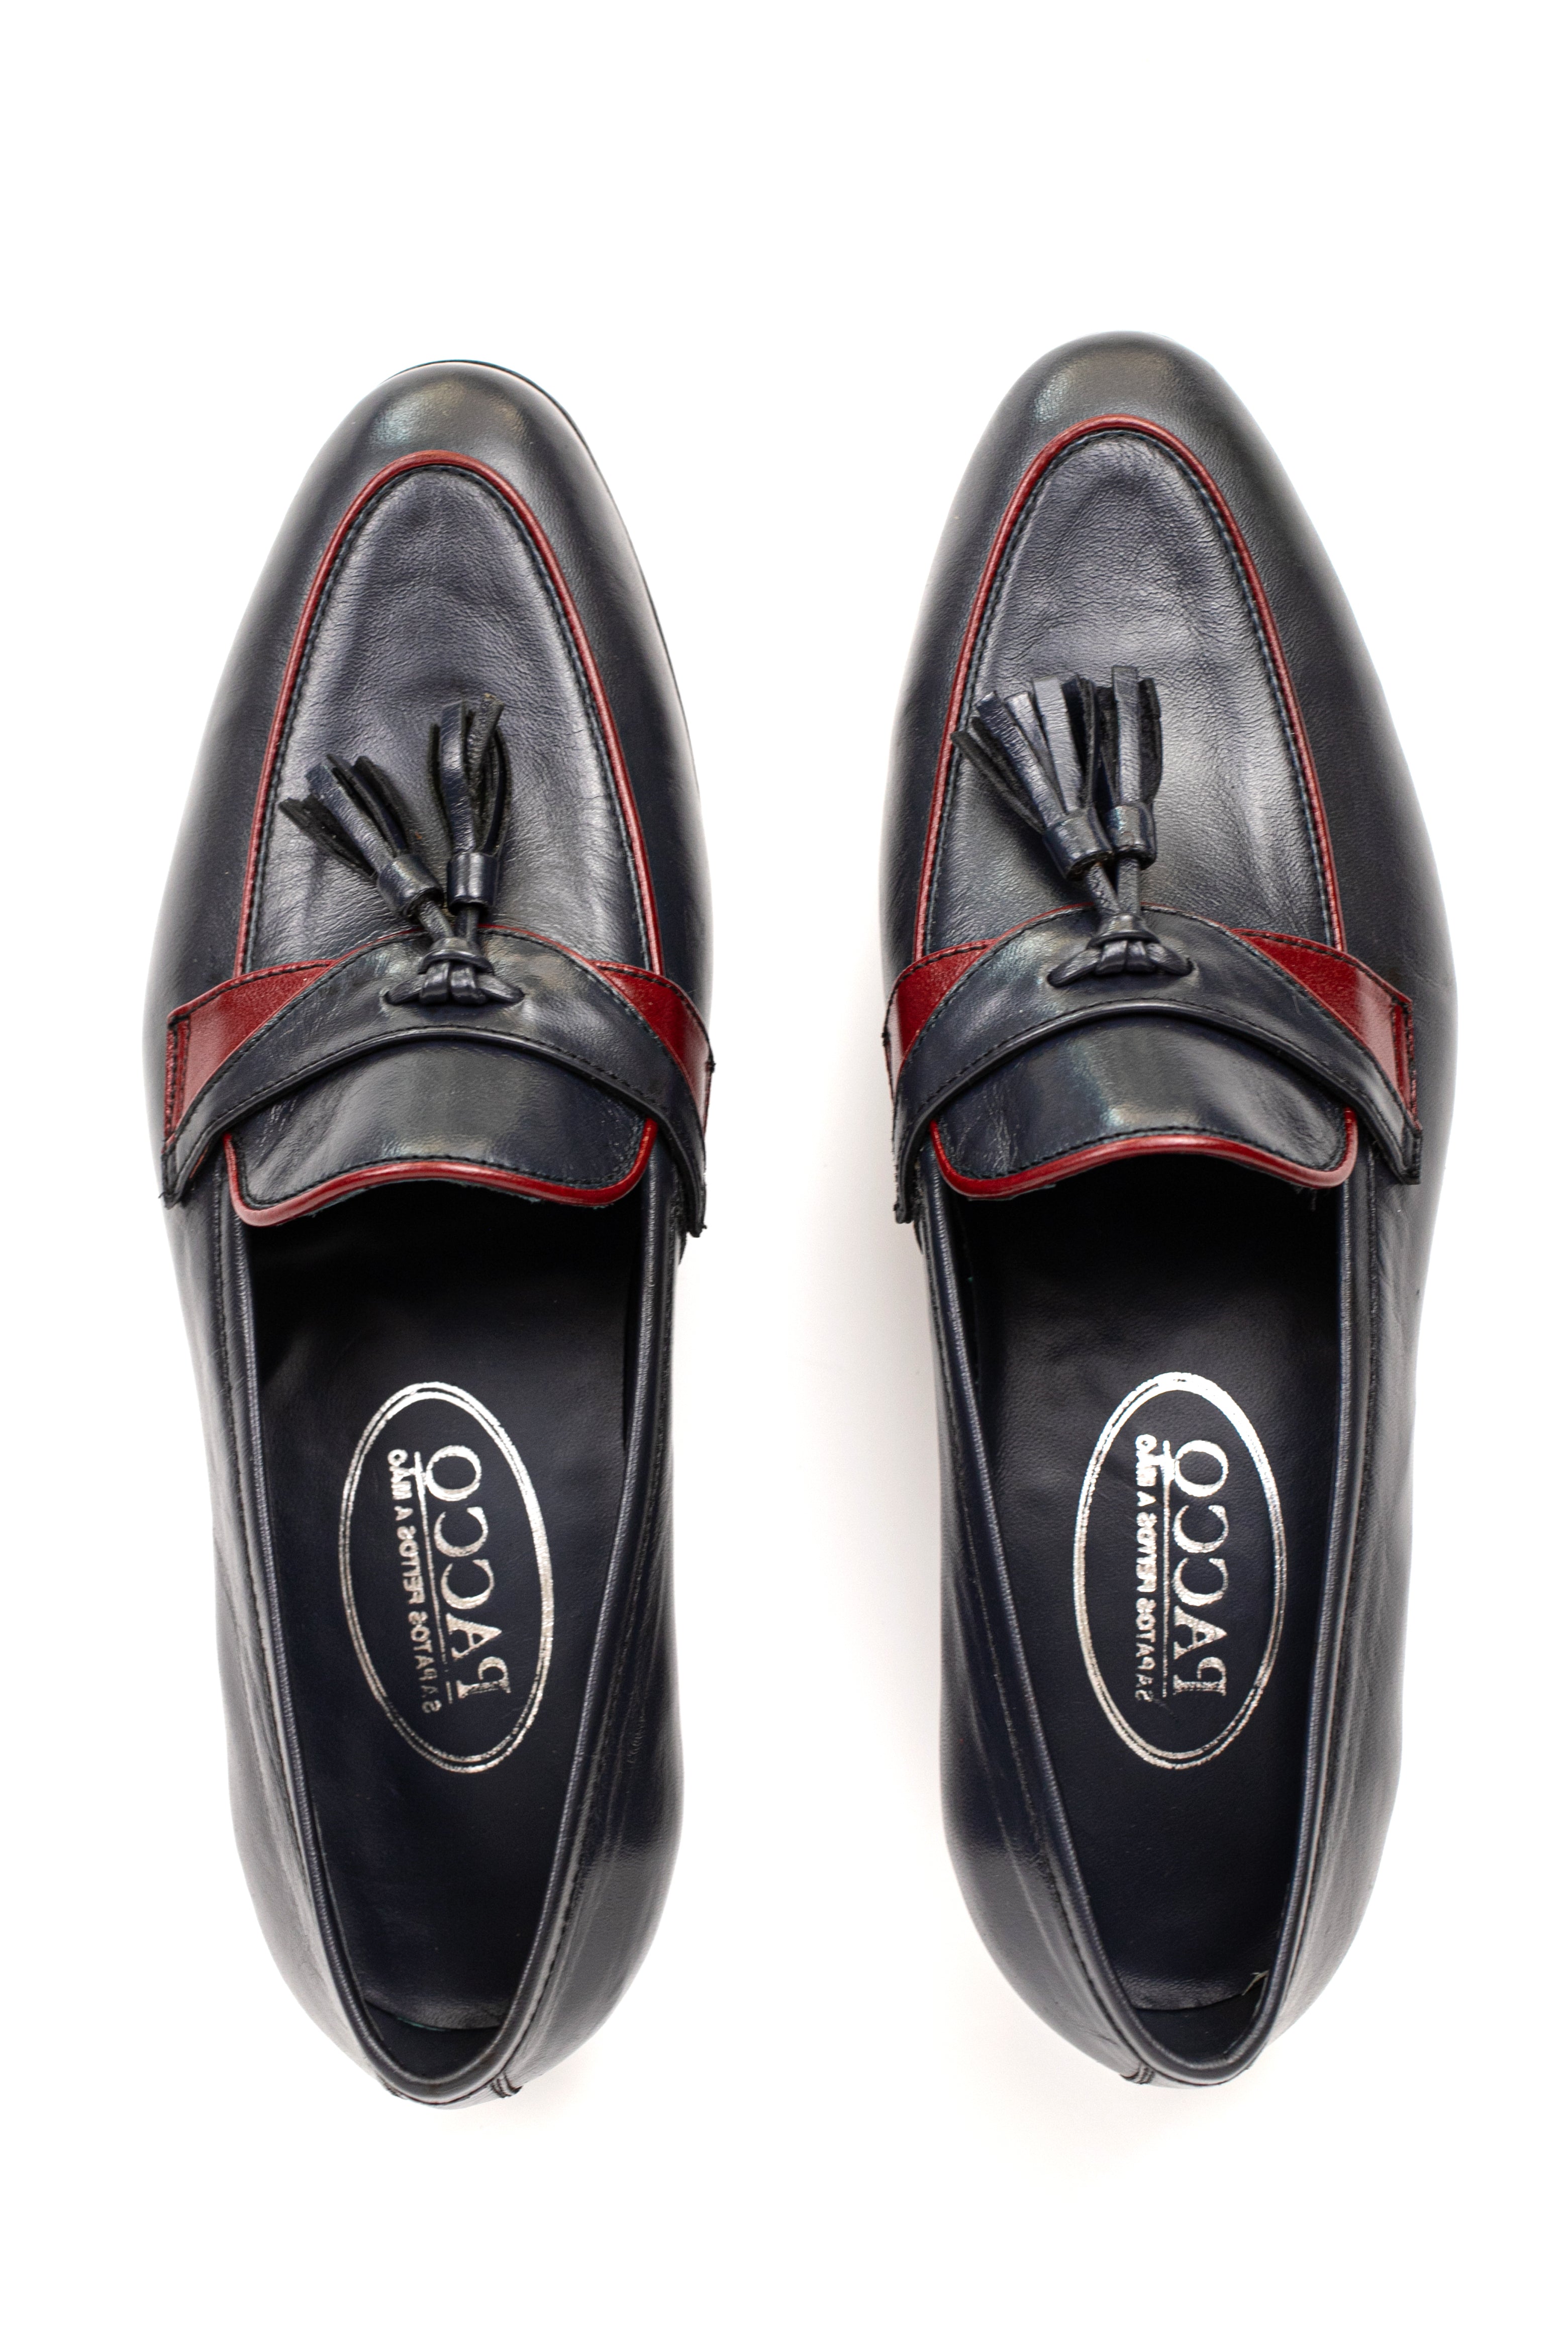 Tassel Loafer created by Pacco - Enrico in Navy Blue with Wine